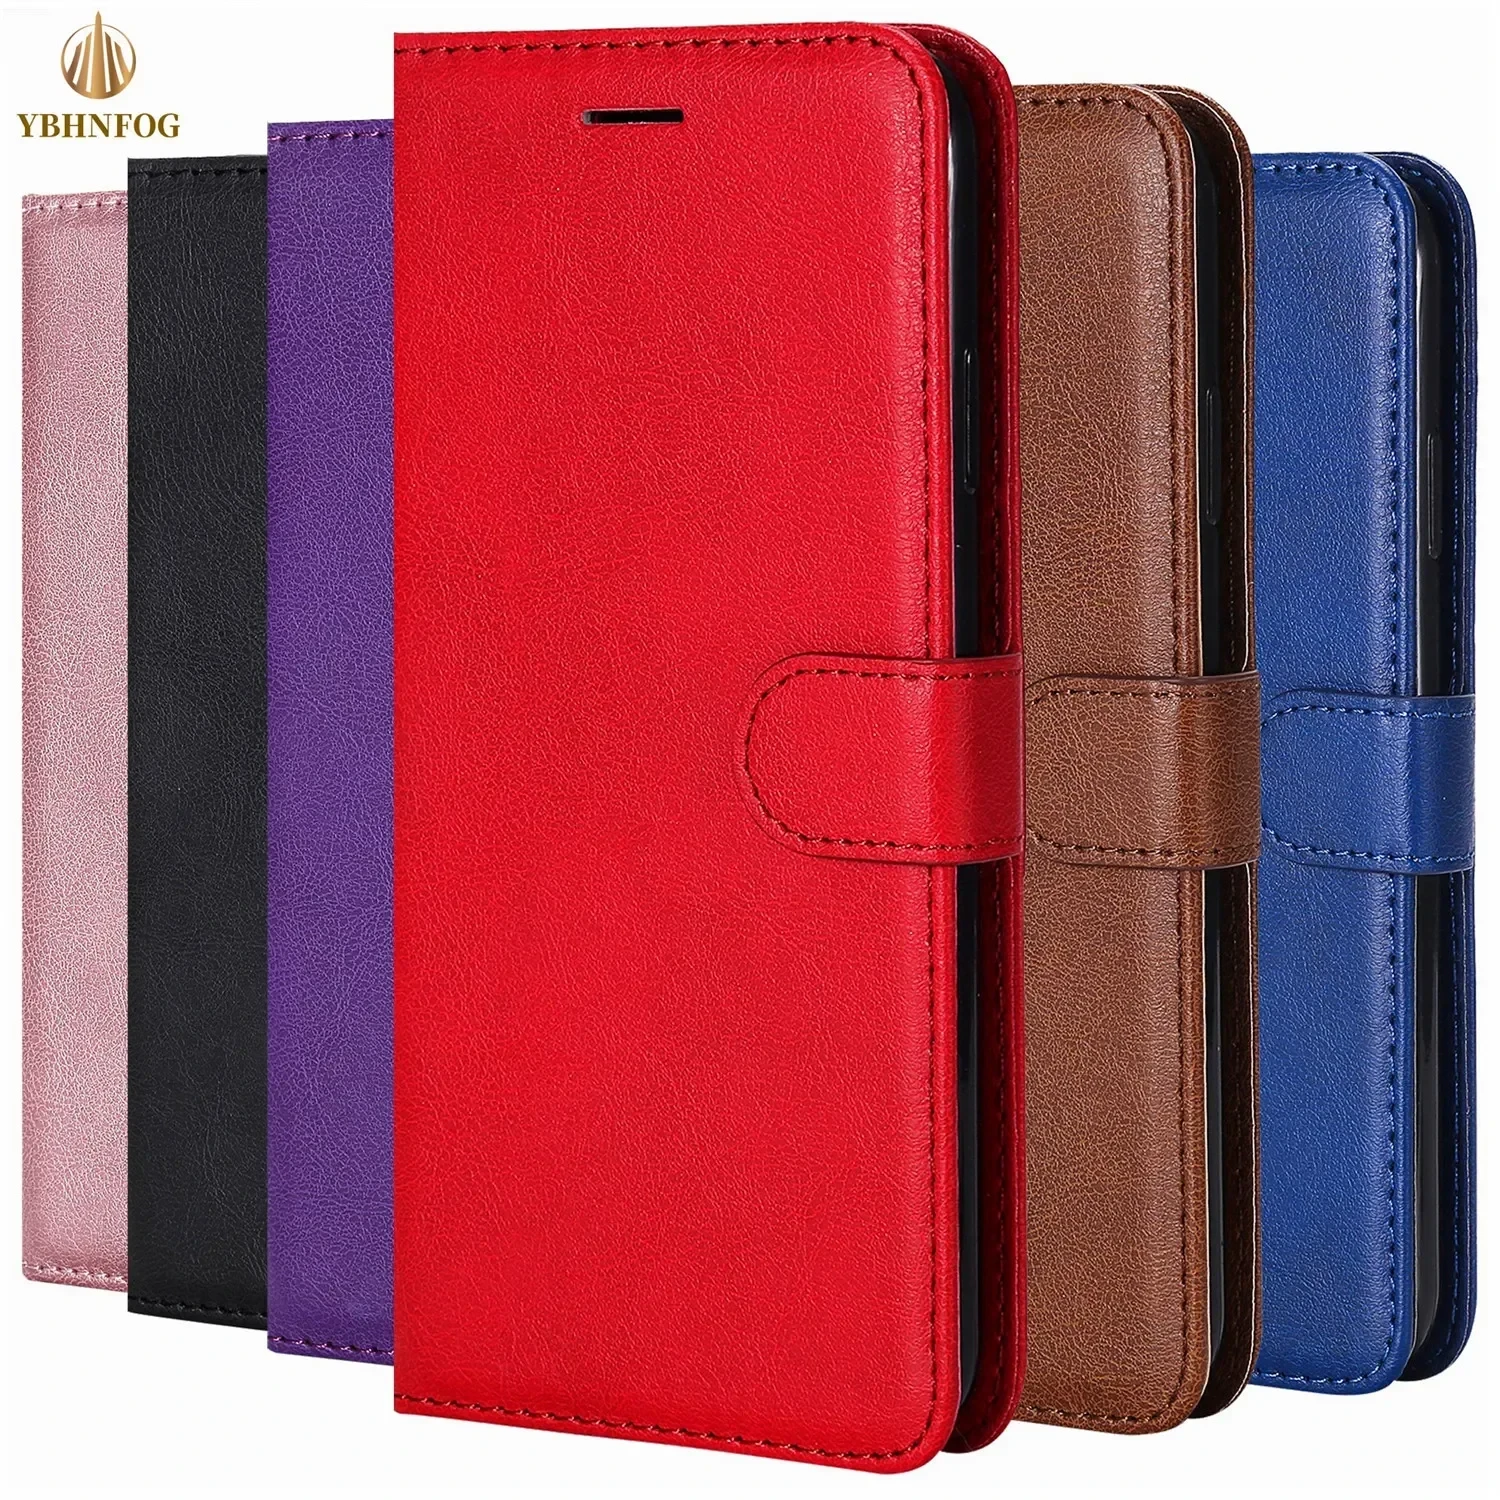 Luxury Simplicity Leather Wallet Case For LG K4 K7 K8 2017 K10 2018 Flip Cover For LG XPower LG Q6 G7 ThinQ V20 V30 Stand Bag